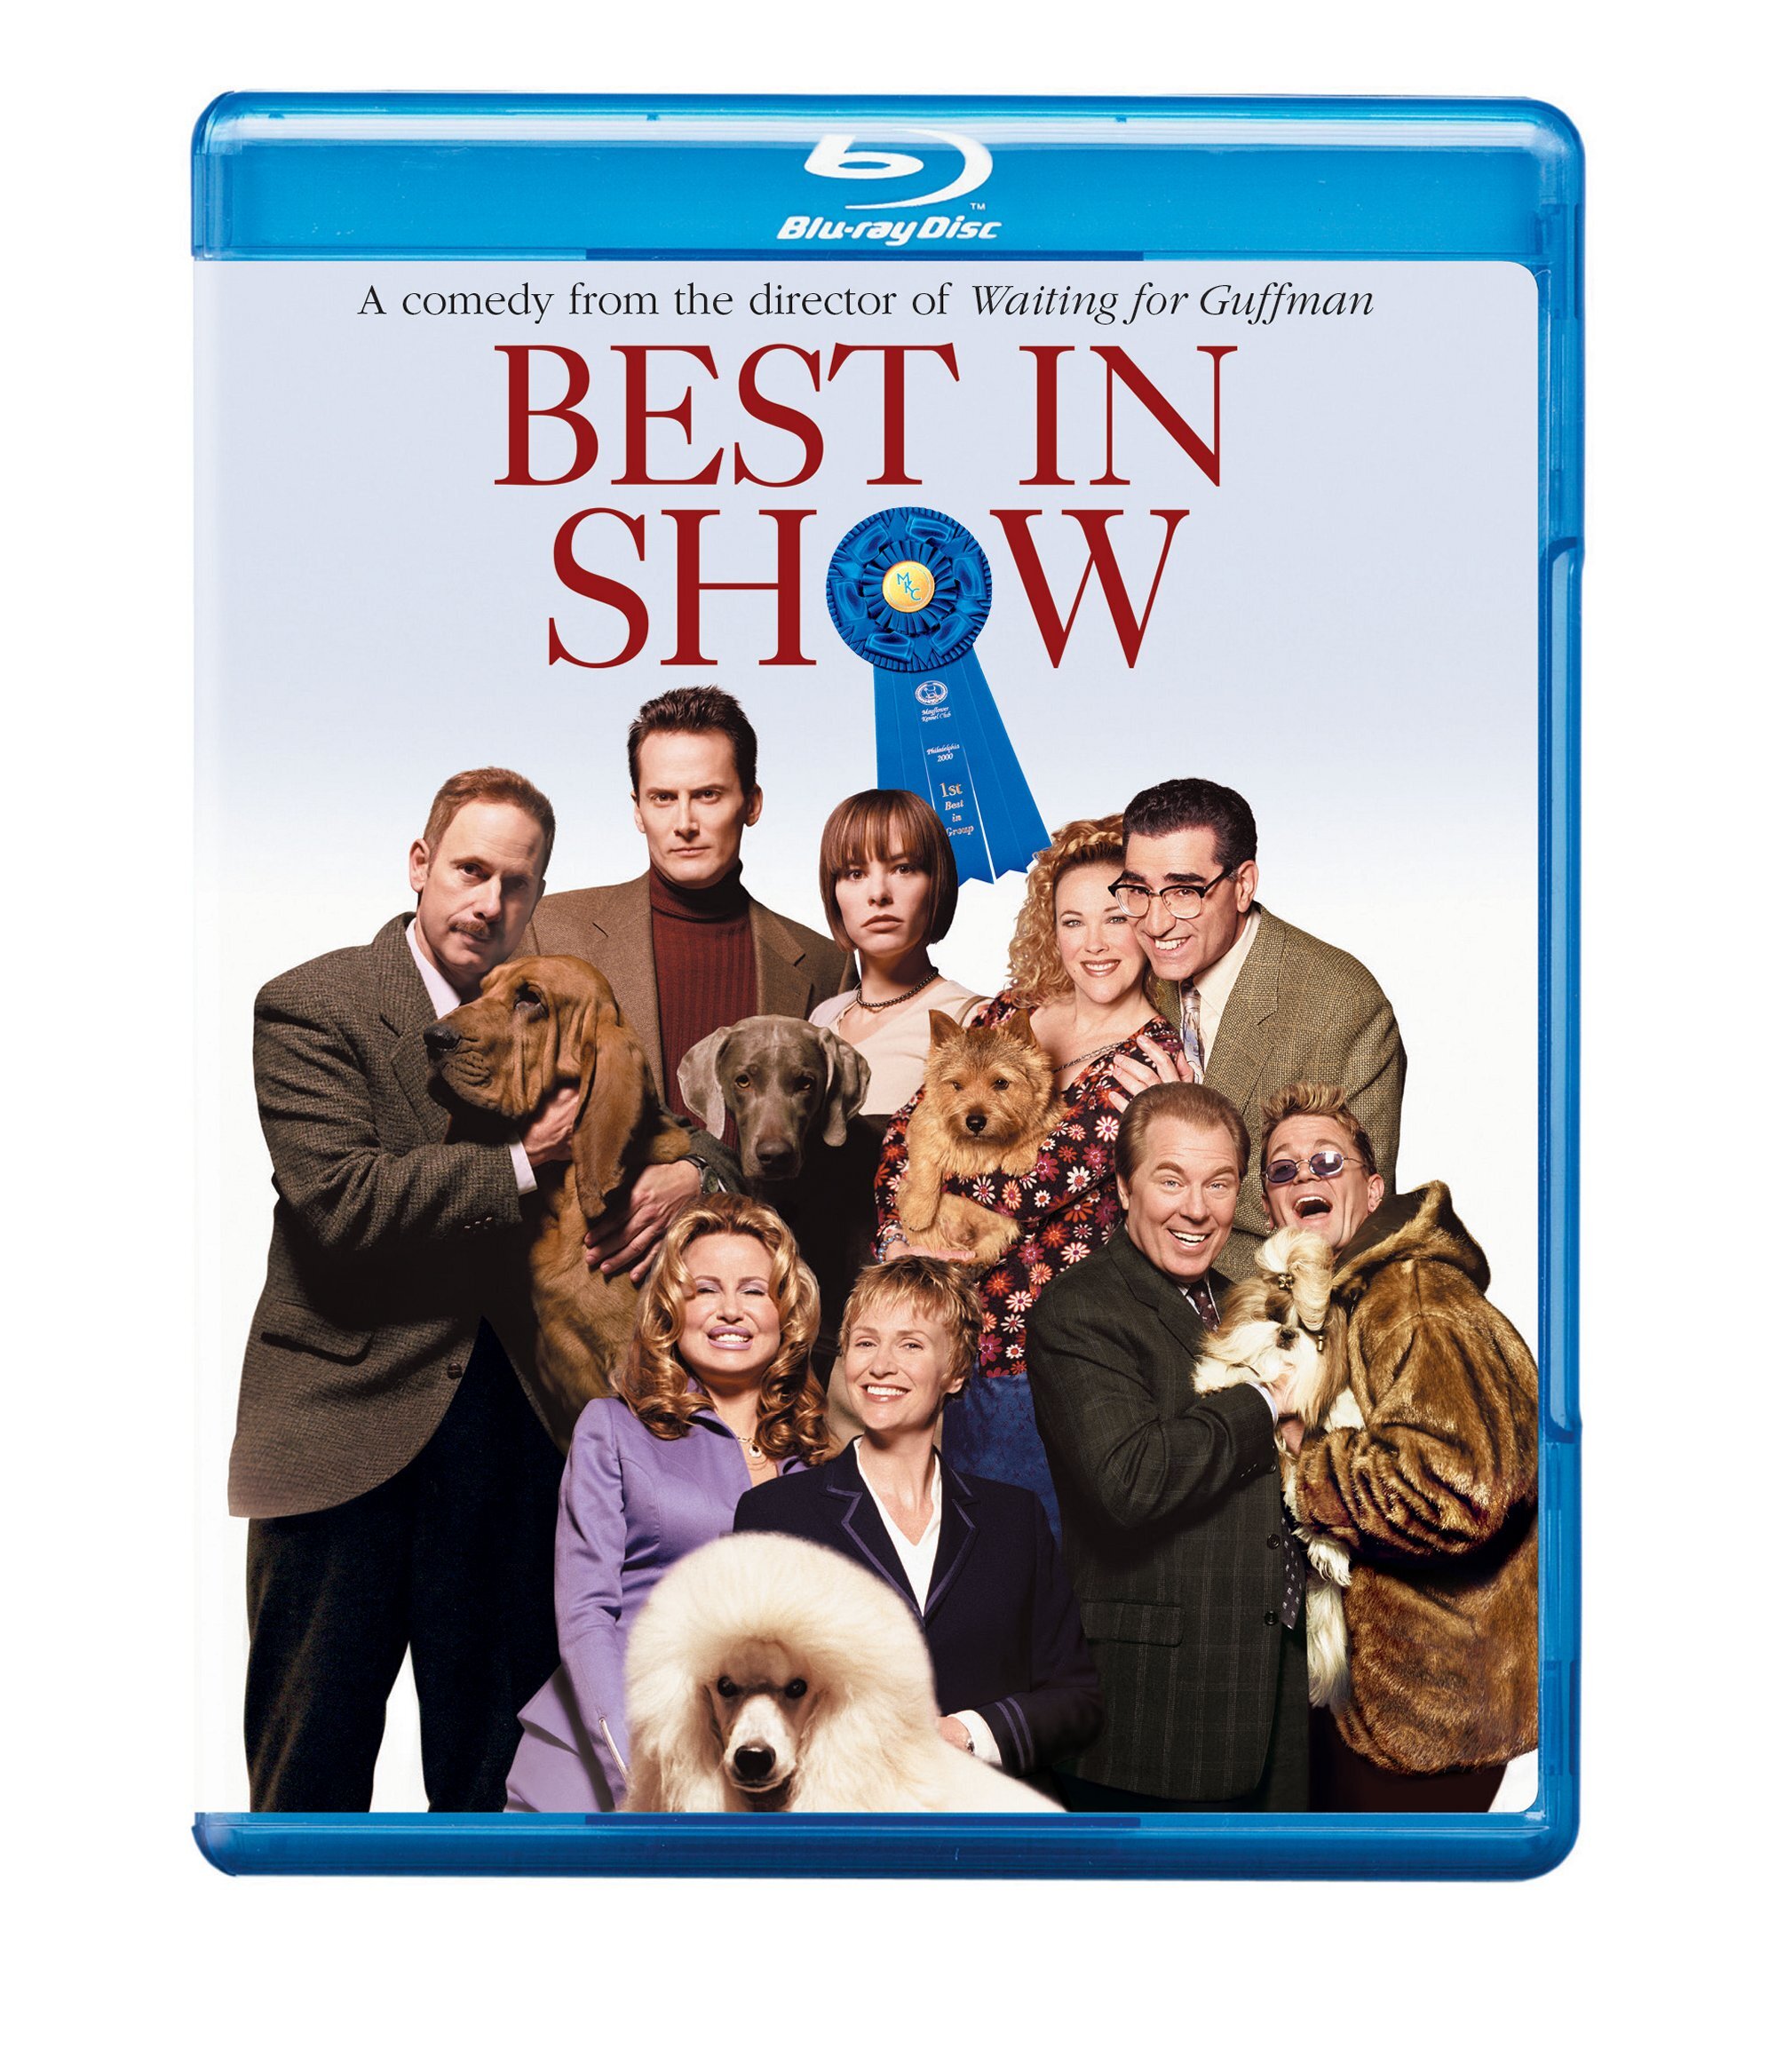 Best In Show - Blu-ray [ 2000 ]  - Comedy Movies On Blu-ray - Movies On GRUV